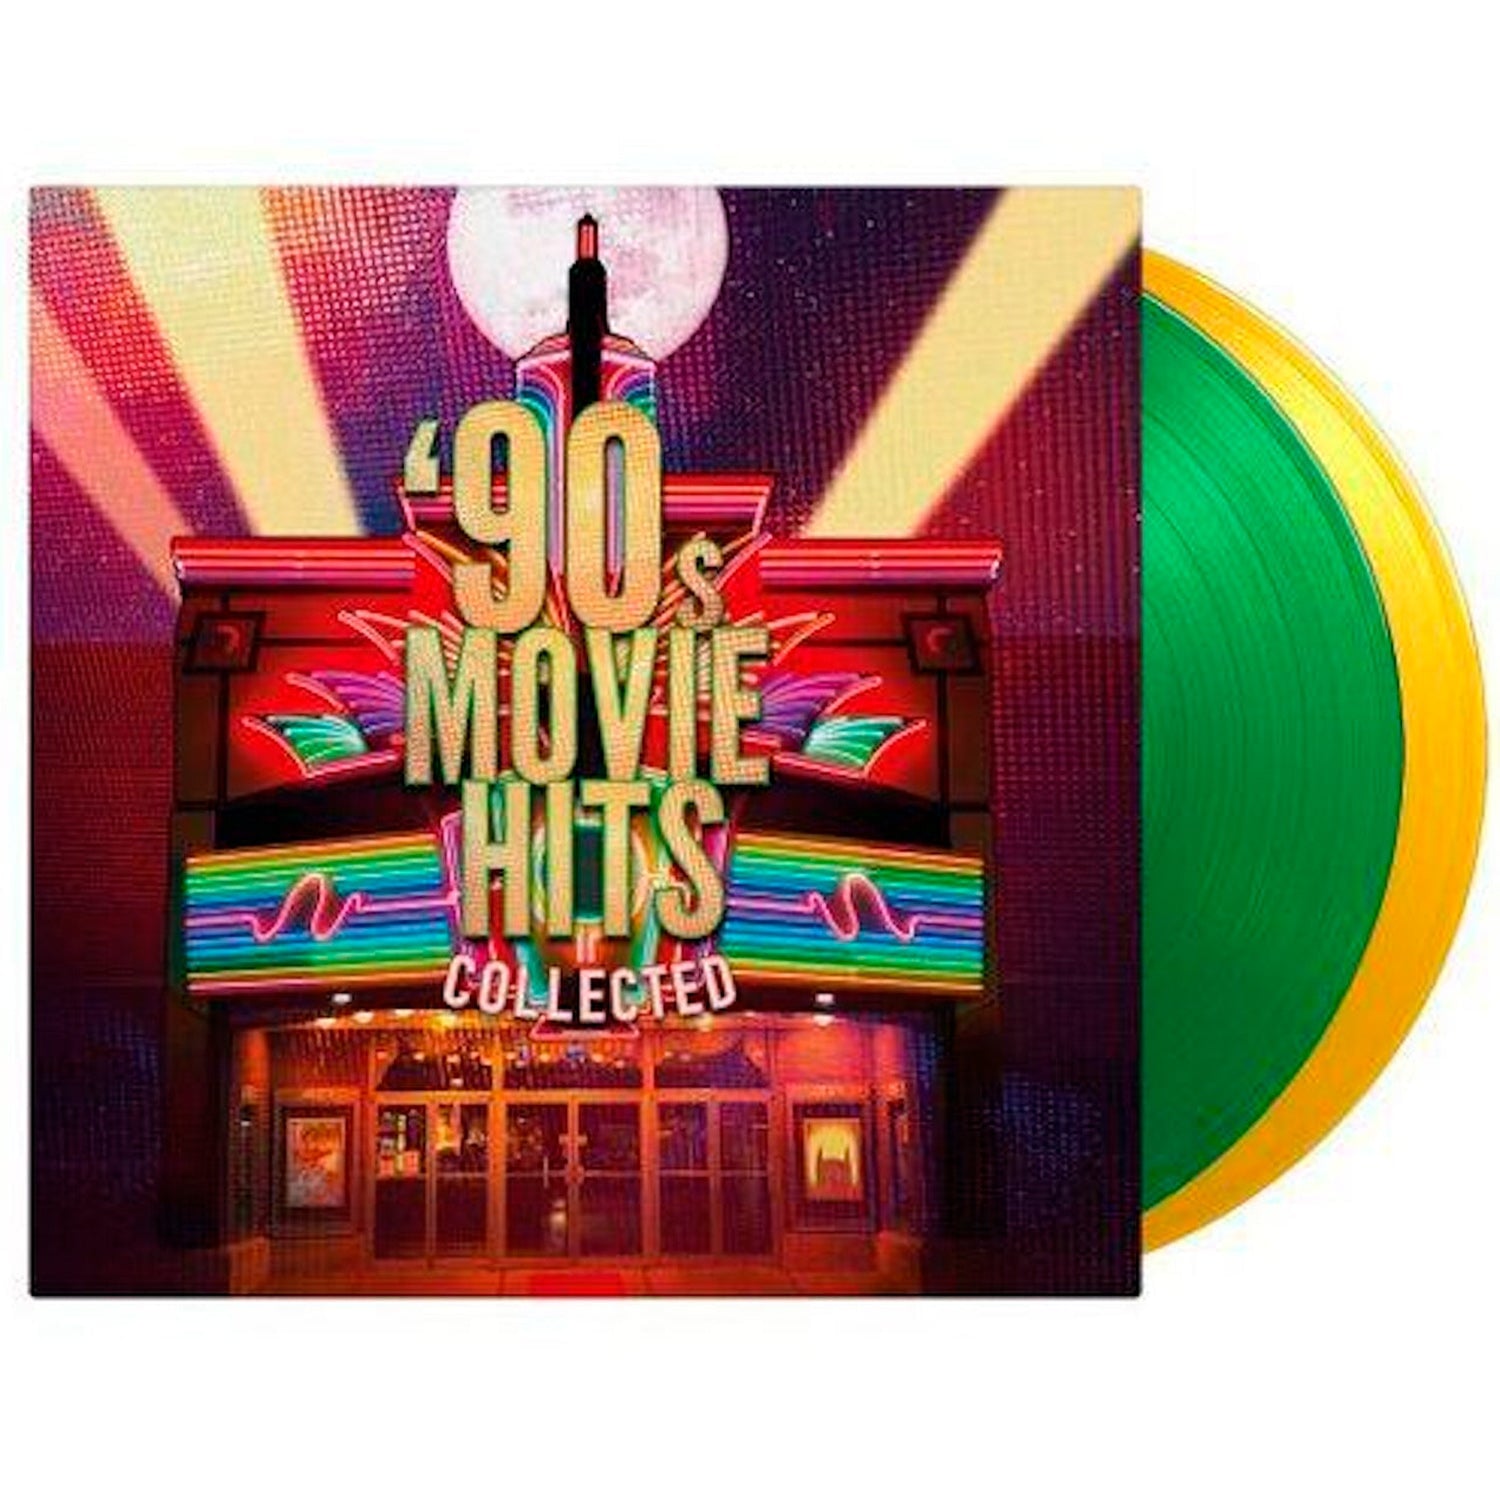 90s Movie Hits Collected (Soundtracks) (Translucent Green & Yellow Vinyl 2 LP)